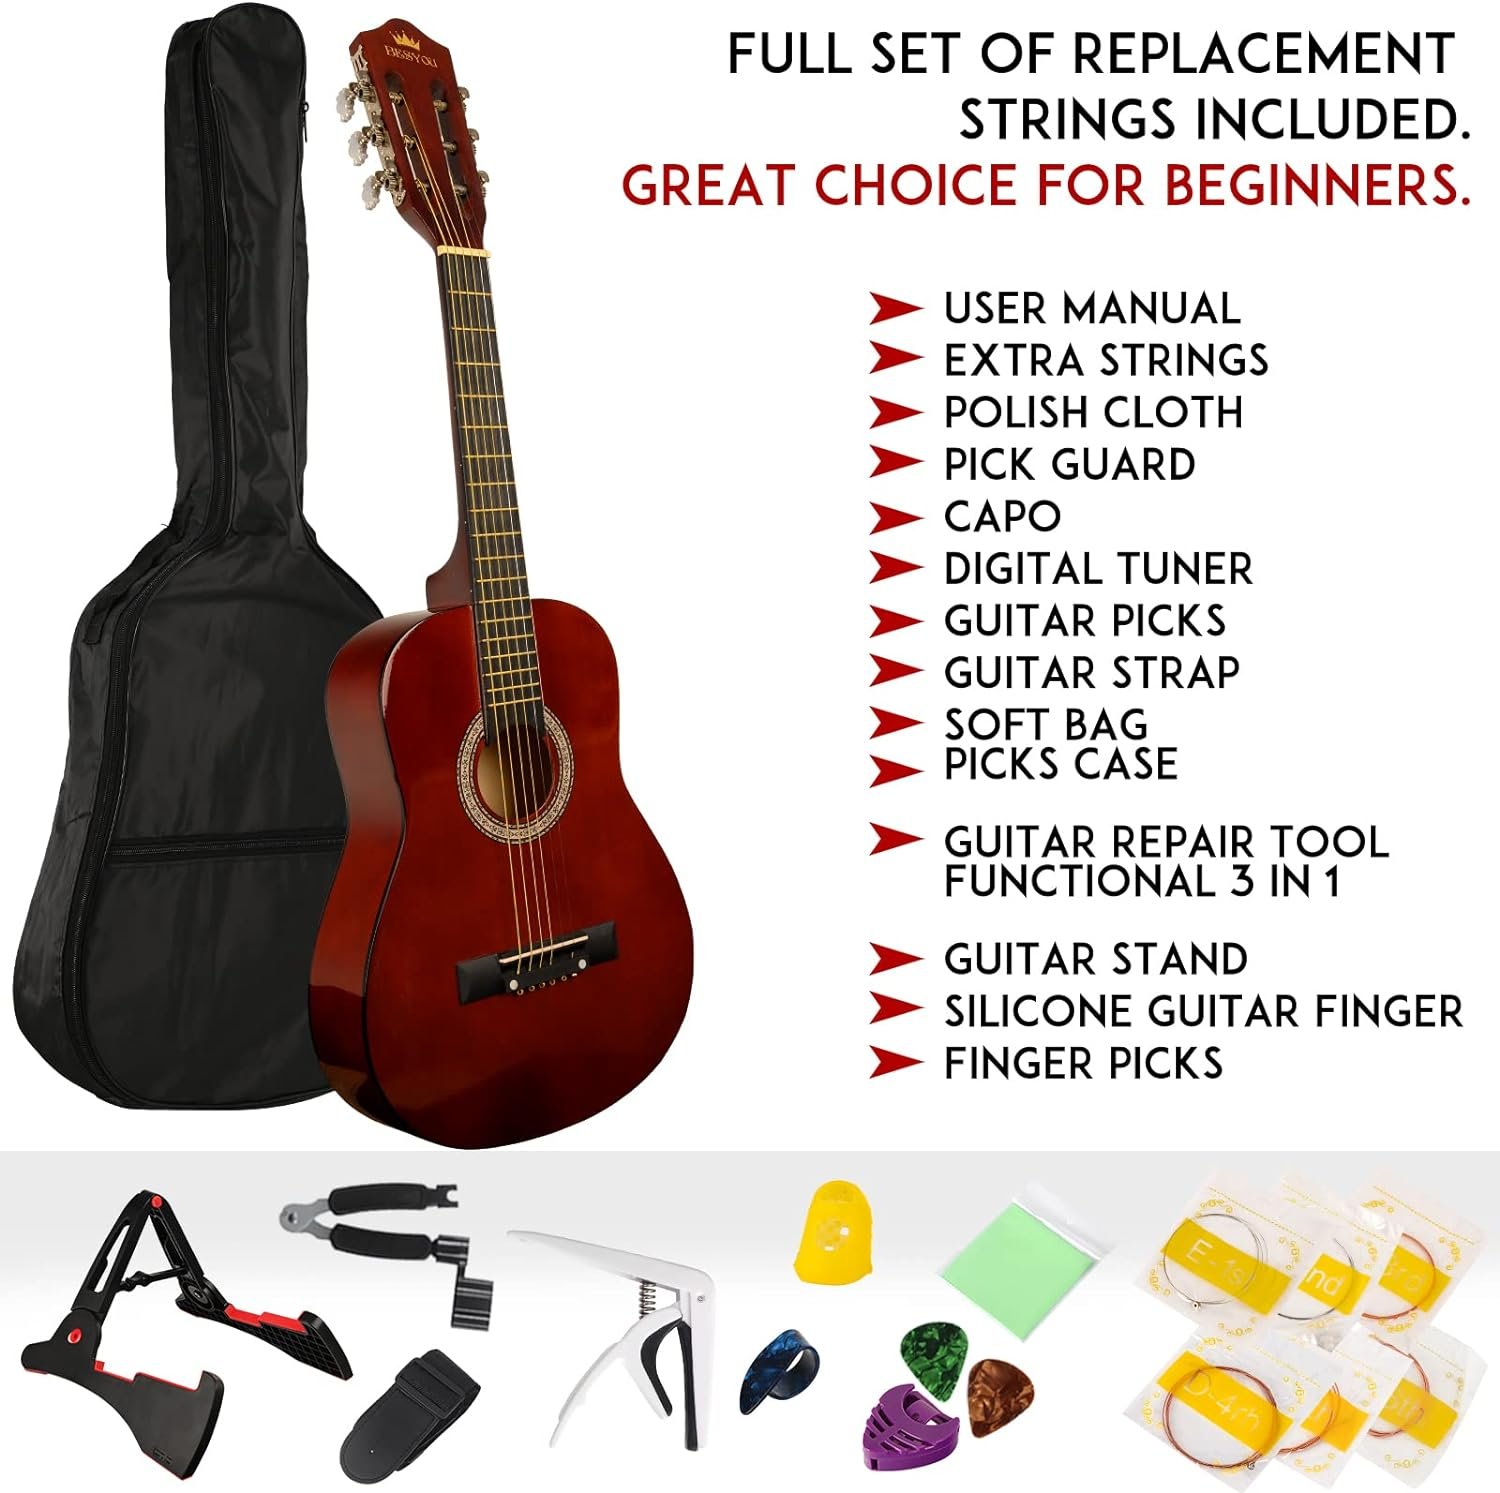 BESYOU Acoustic Guitar 38 Wood Guitar with starter kit-Travel Gig Bag, Tuner,guitar pick with Beginner Set for Kids/Adults -Natural